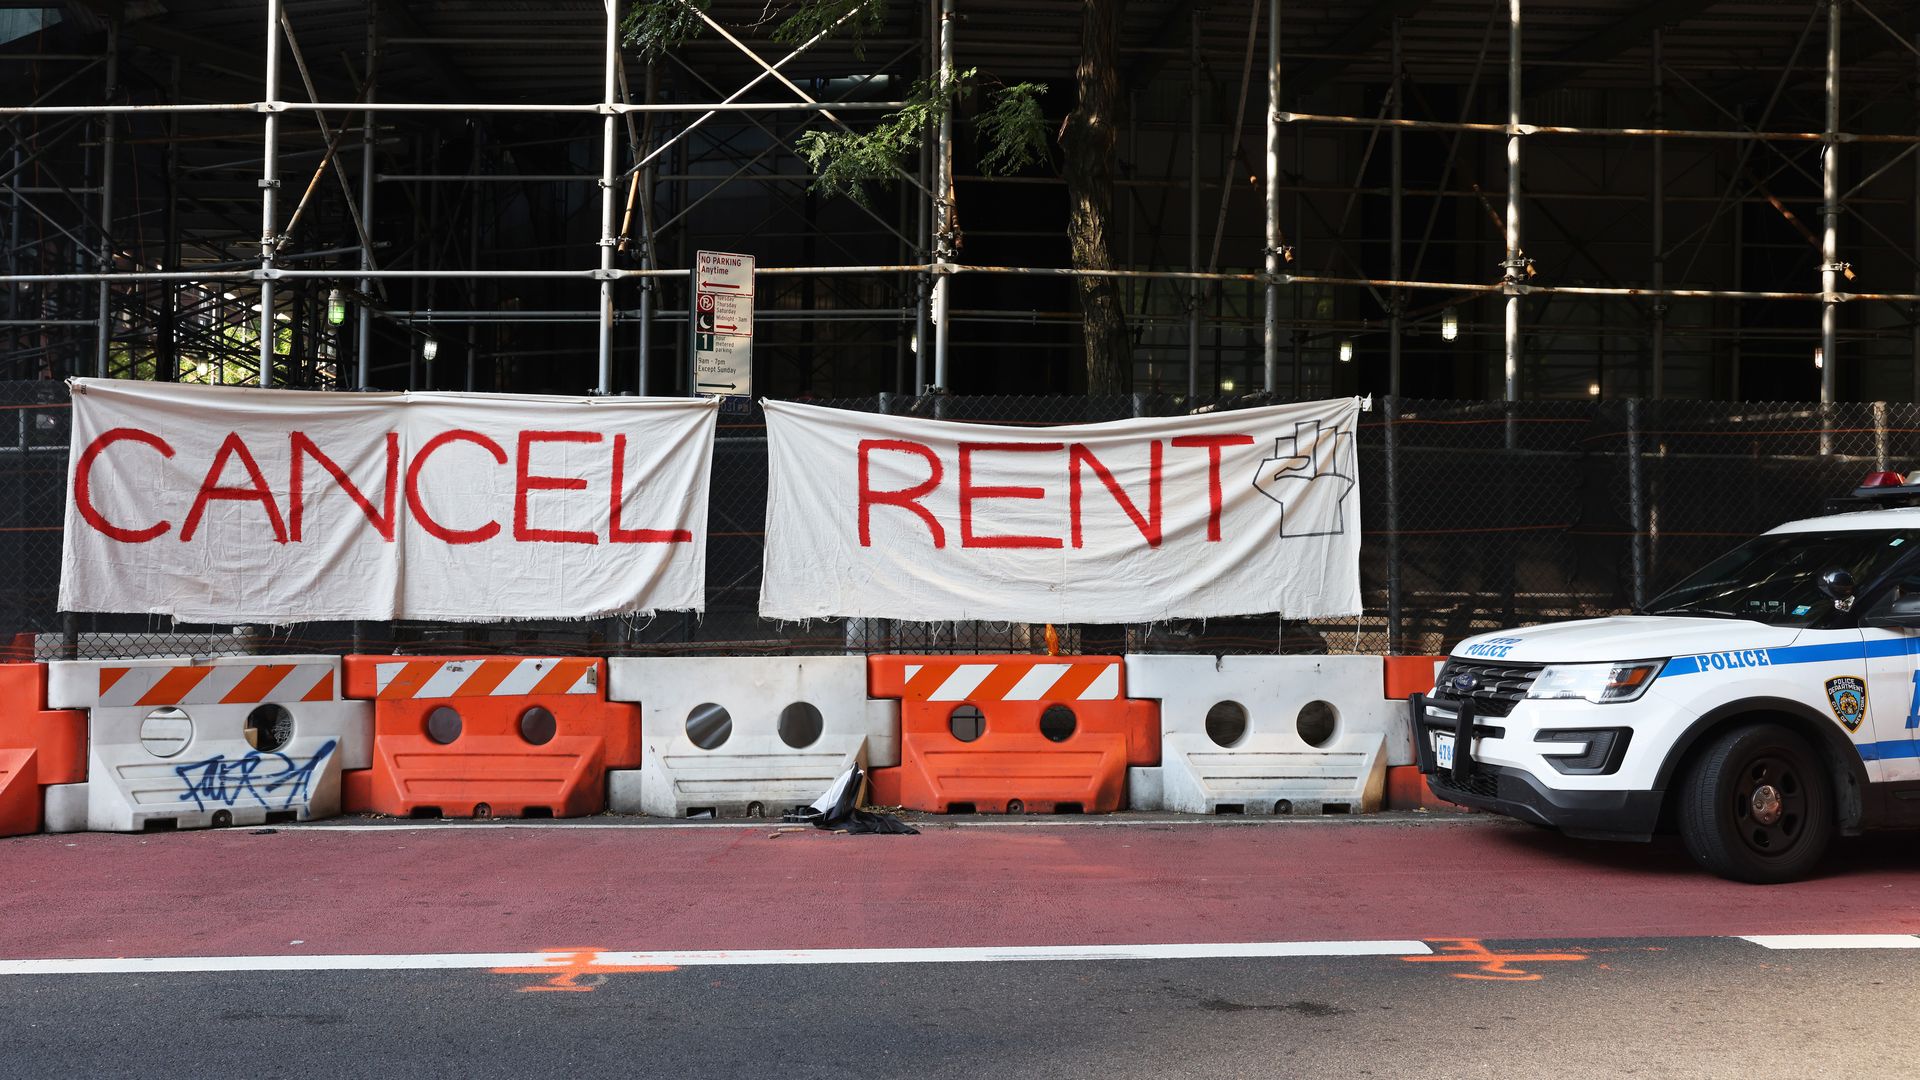 Cancel rent sign in NYC